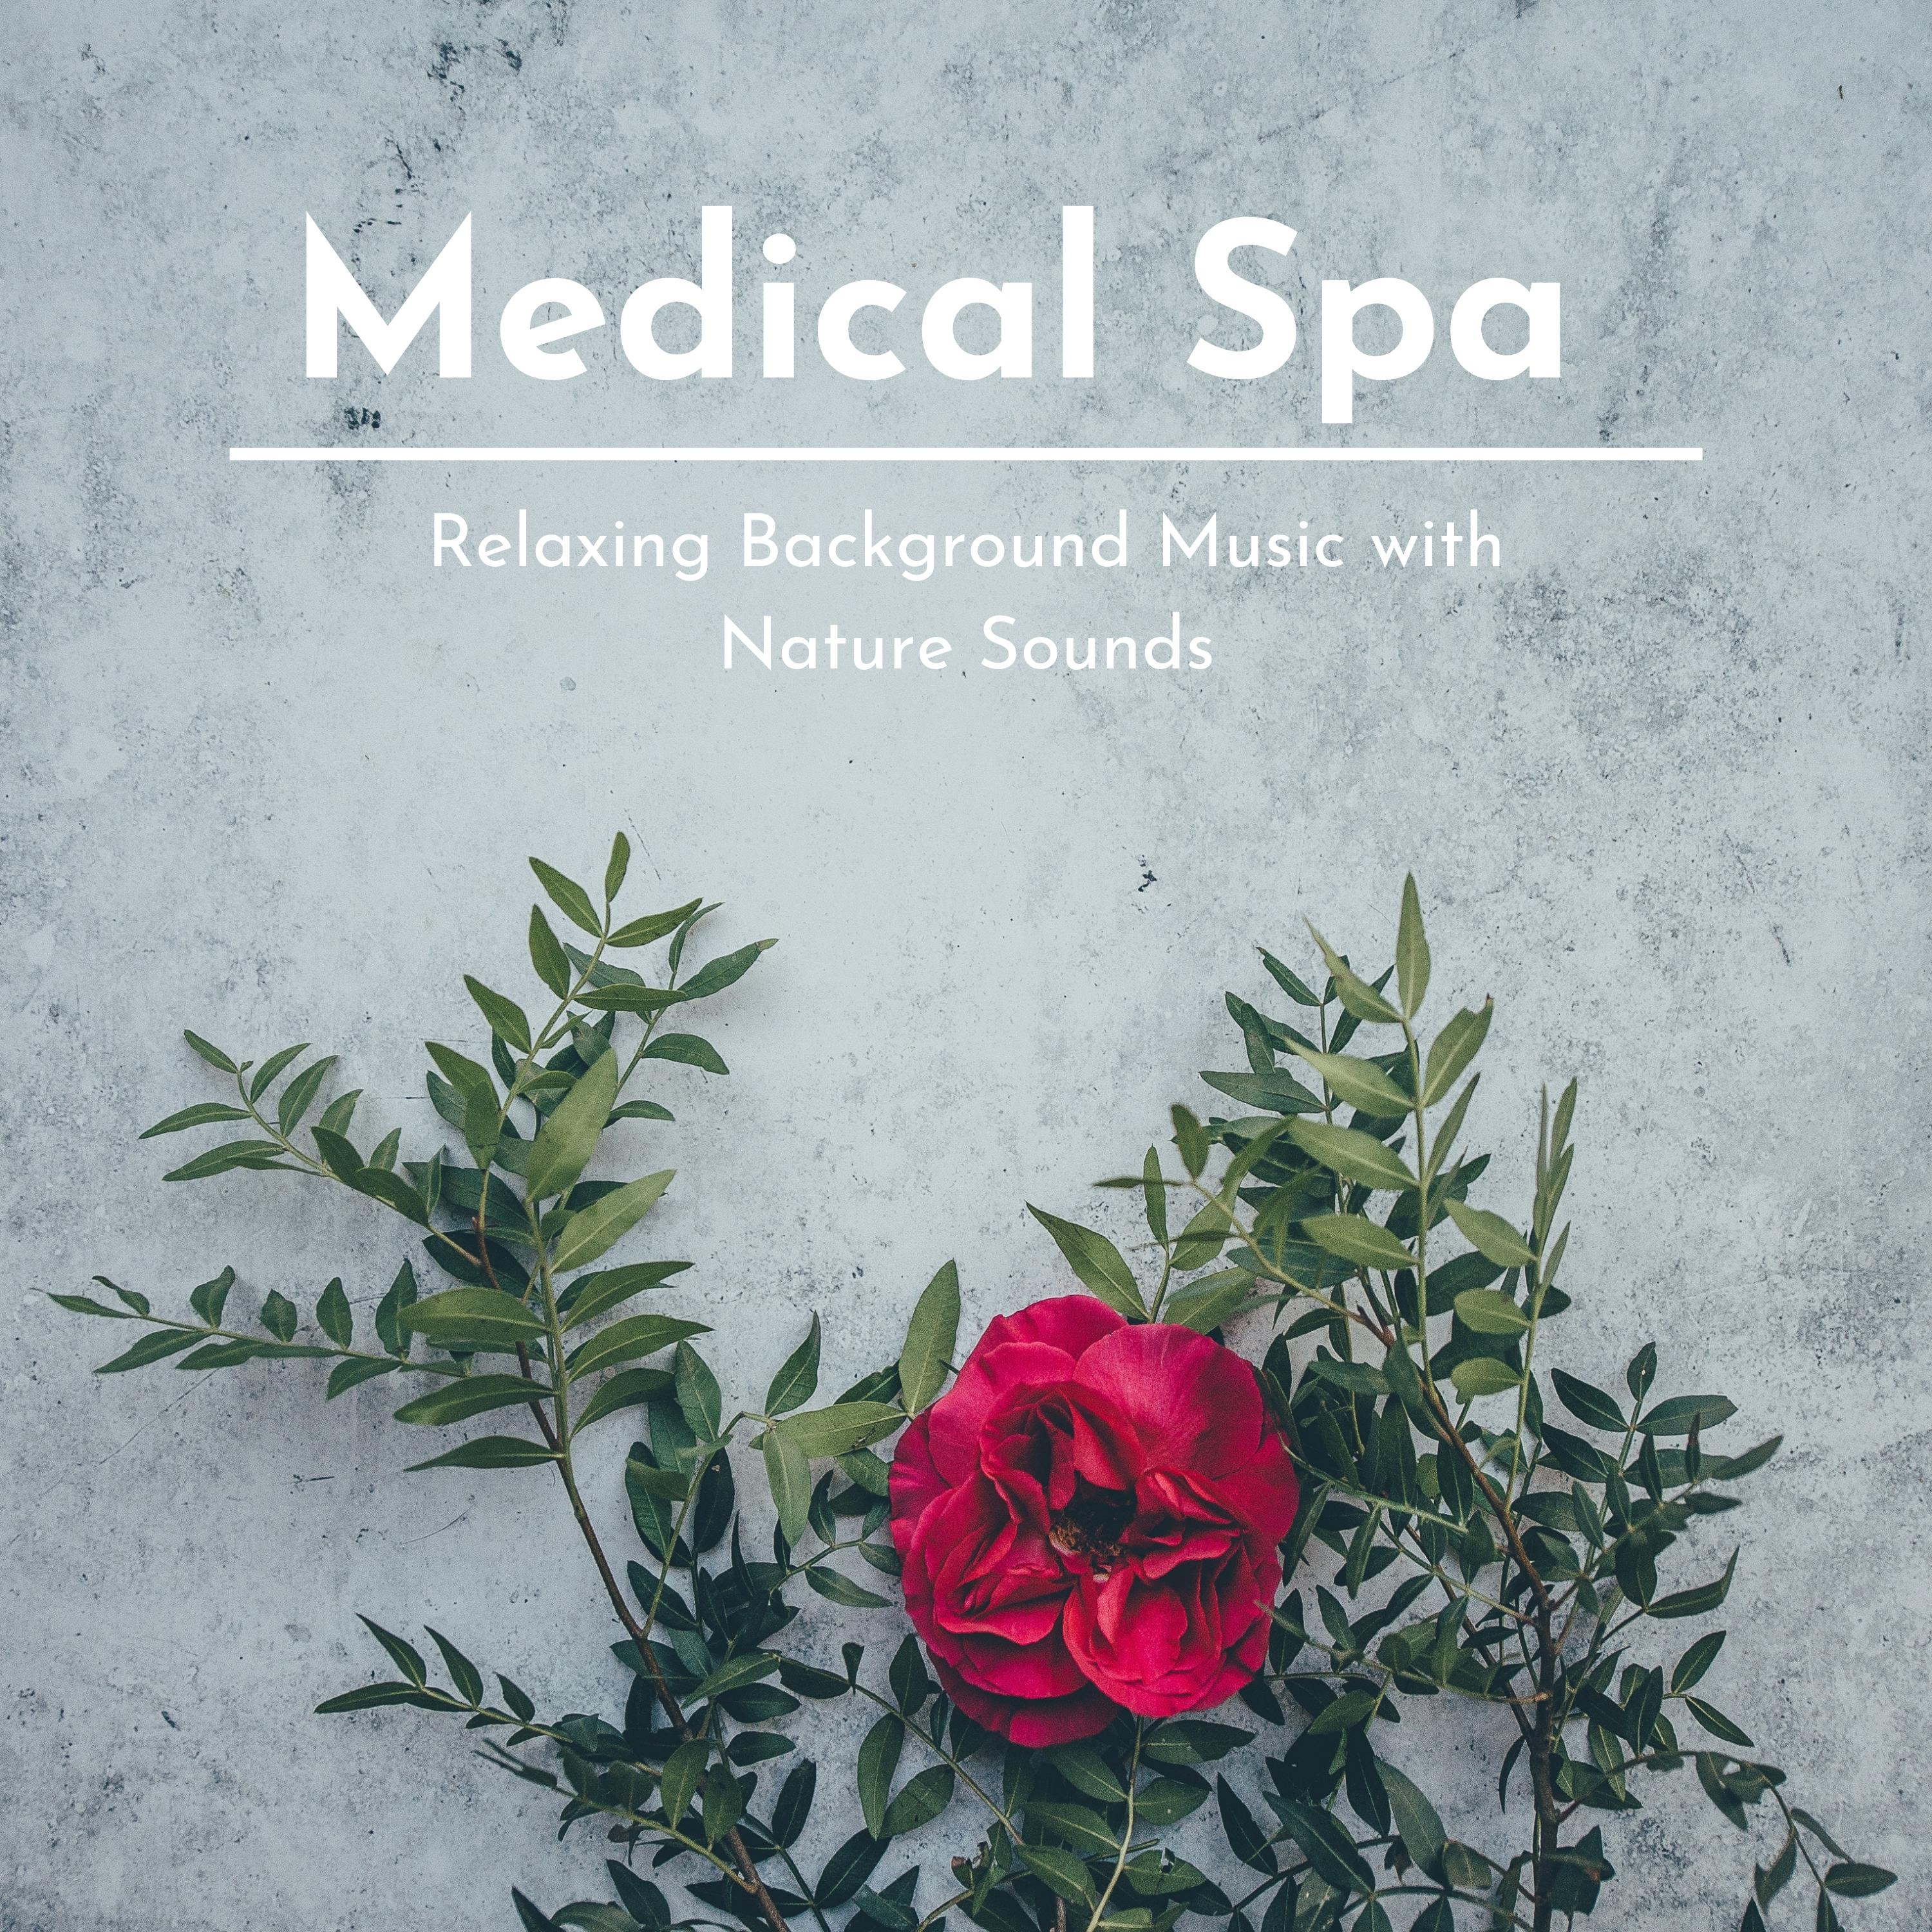 Medical Spa: Relaxing Background Music with Nature Sounds